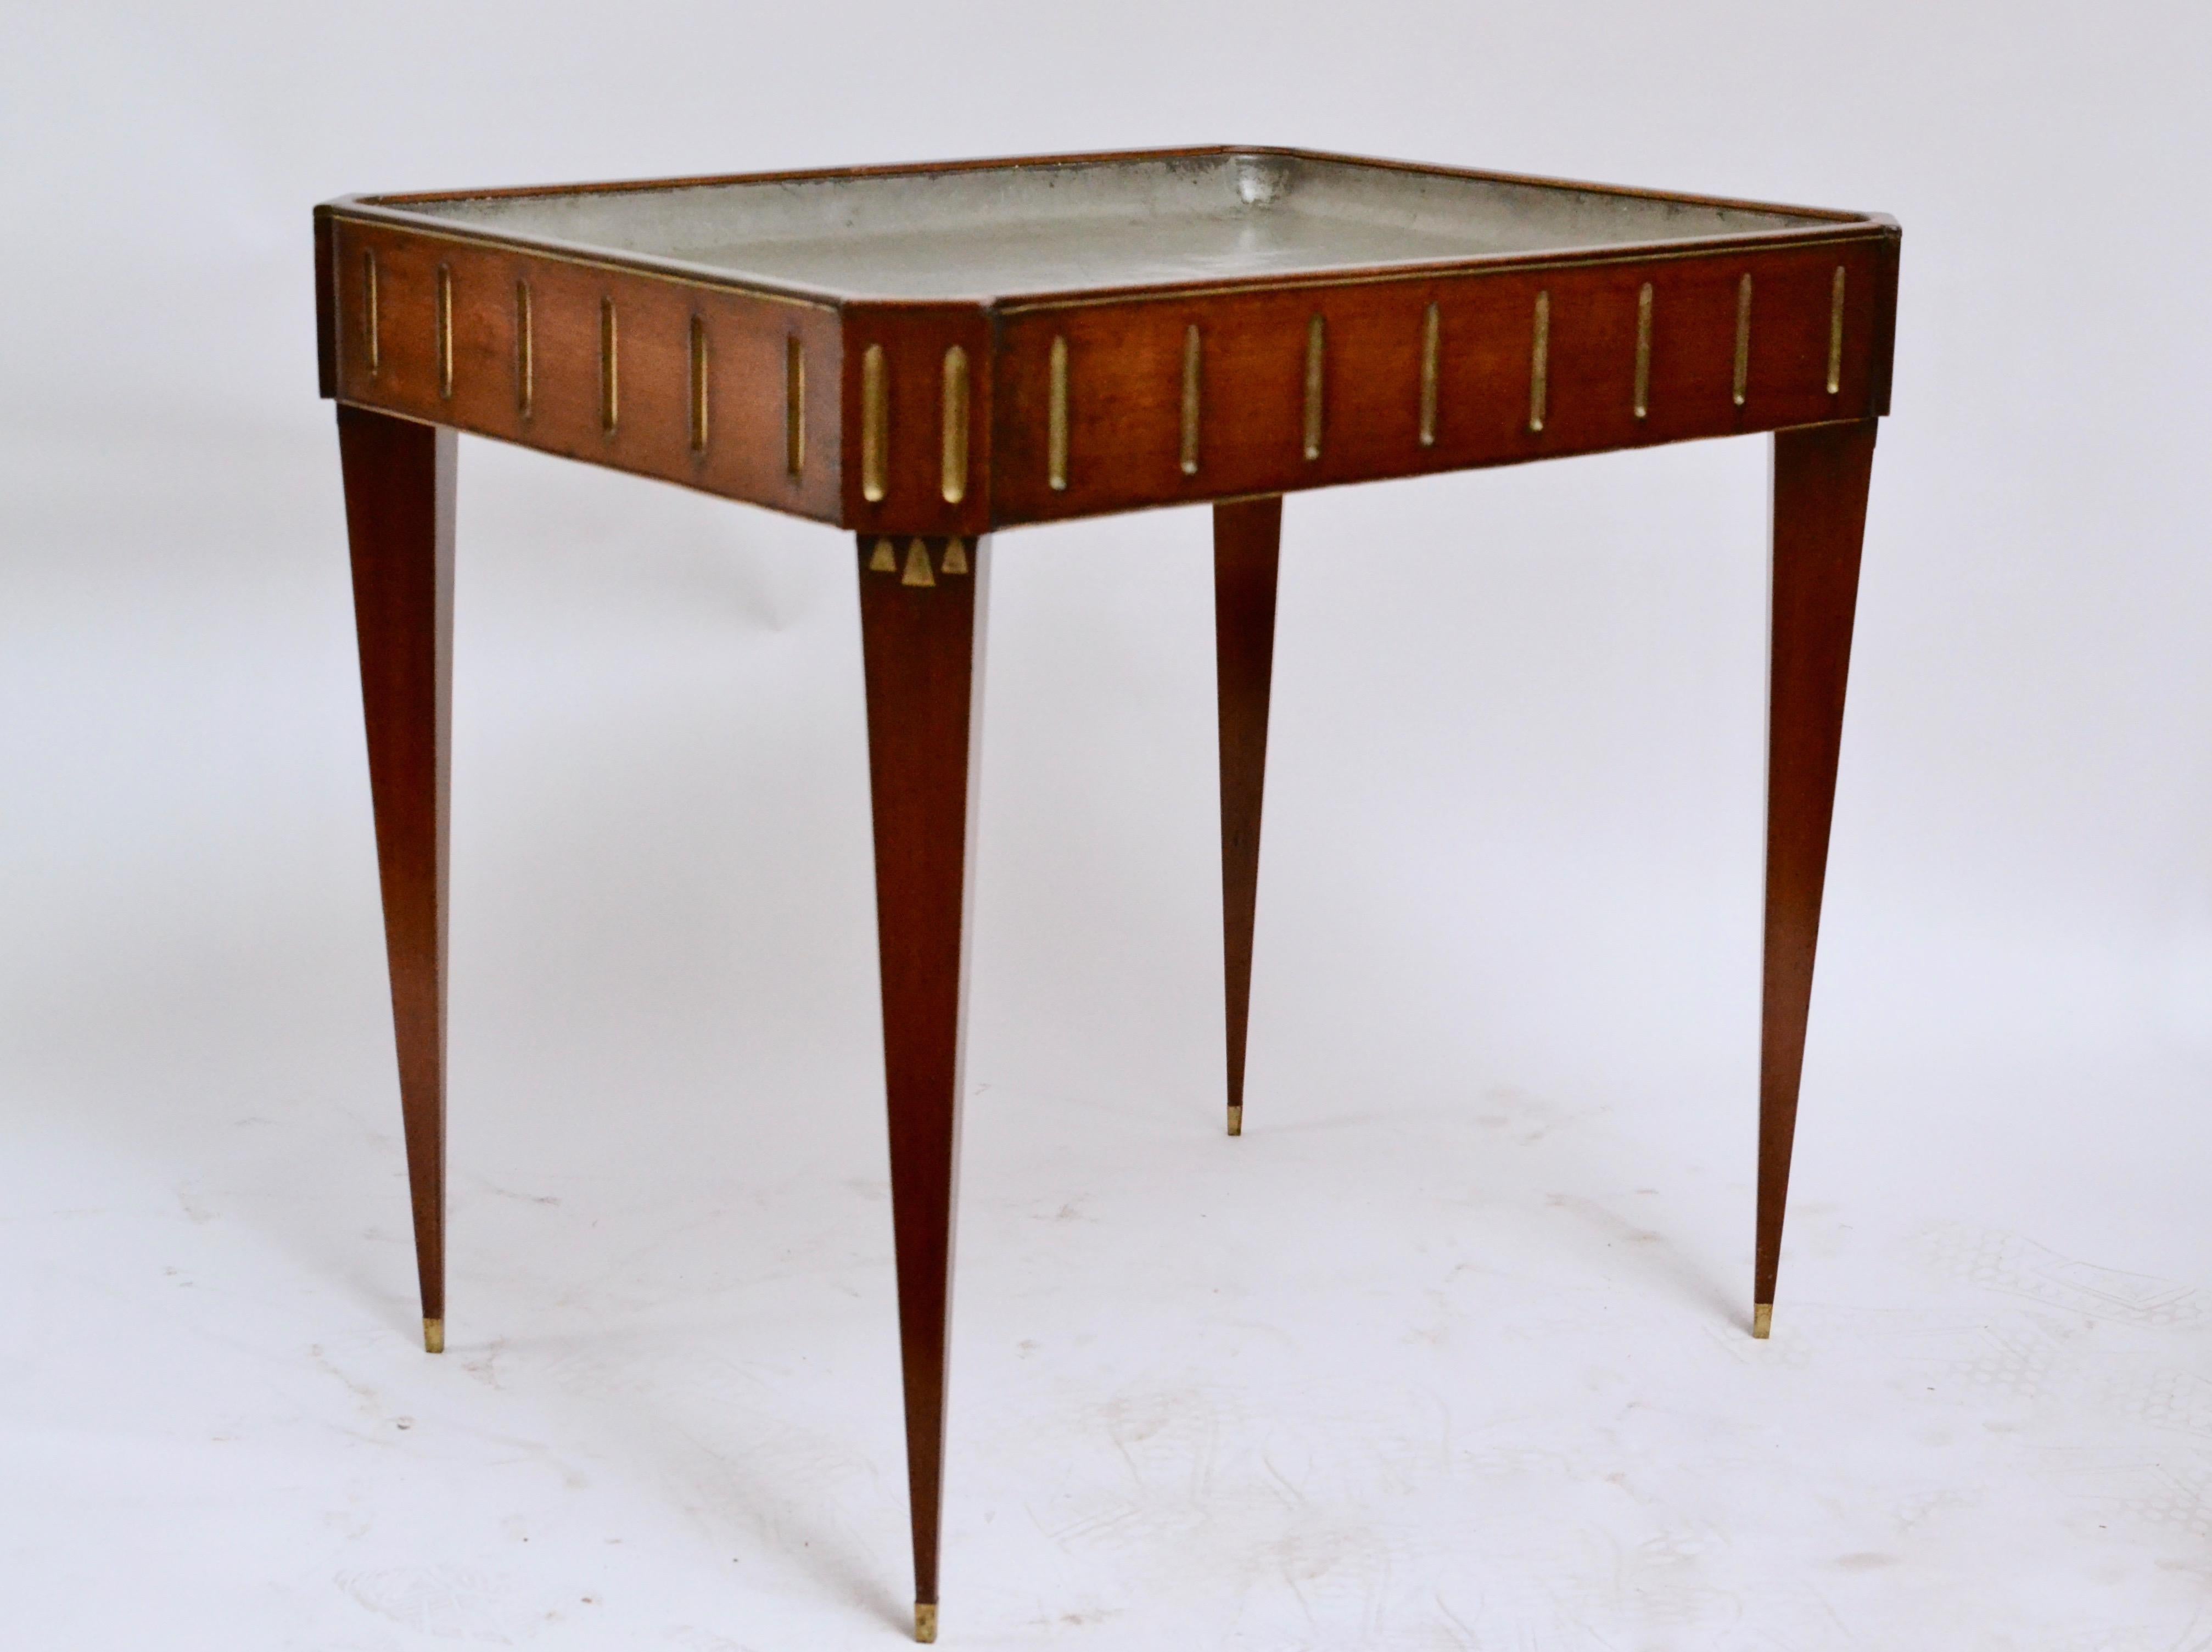 Late 18th Century Swedish Gustavian Mahogany Tea Table with Pewter Top, 18th Century